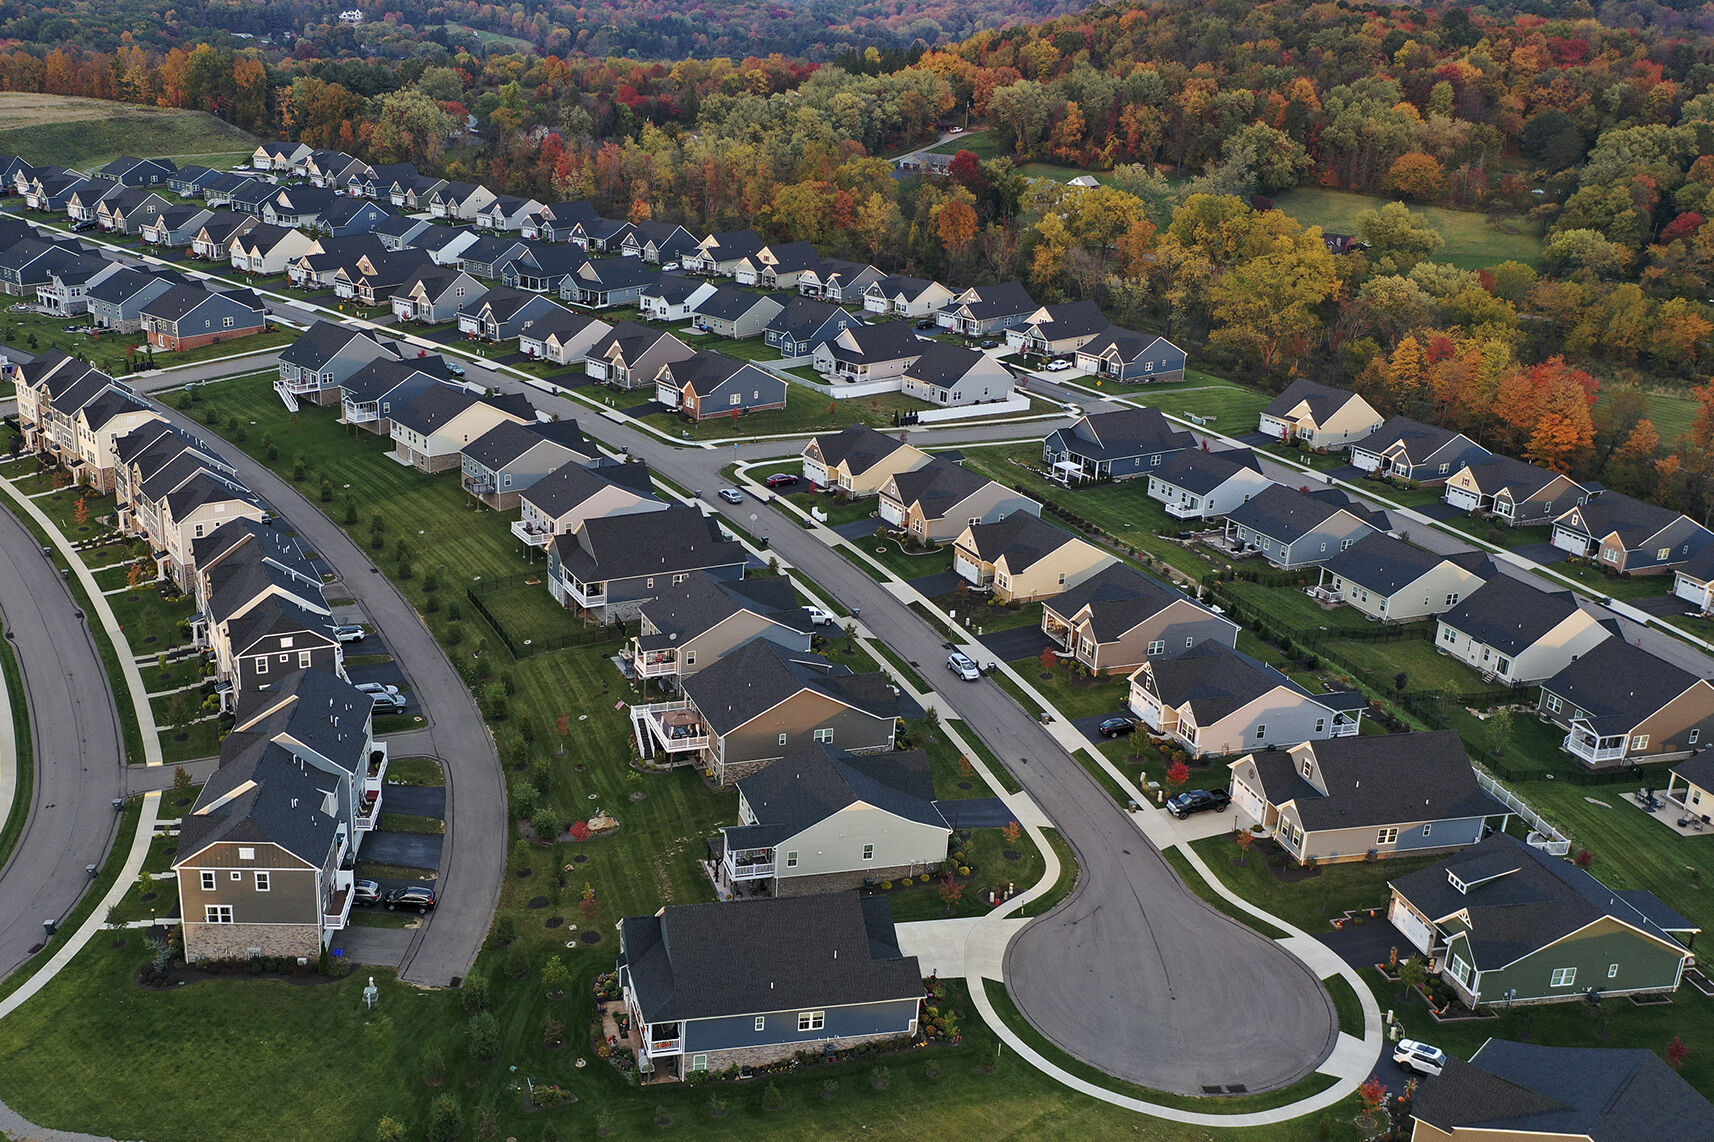 <p>FILE - A cul-de-sac runs through a new housing development in Middlesex Township, Pa., Oct. 12, 2022. The price of natural gas used to heat homes and generate electricity is plunging in 2023, thanks to a mild winter in the U.S. and Europe — bringing some relief to consumers and helping drive down inflation. (AP Photo/Gene J. Puskar, File)</p>   PHOTO CREDIT: Gene J. Puskar 